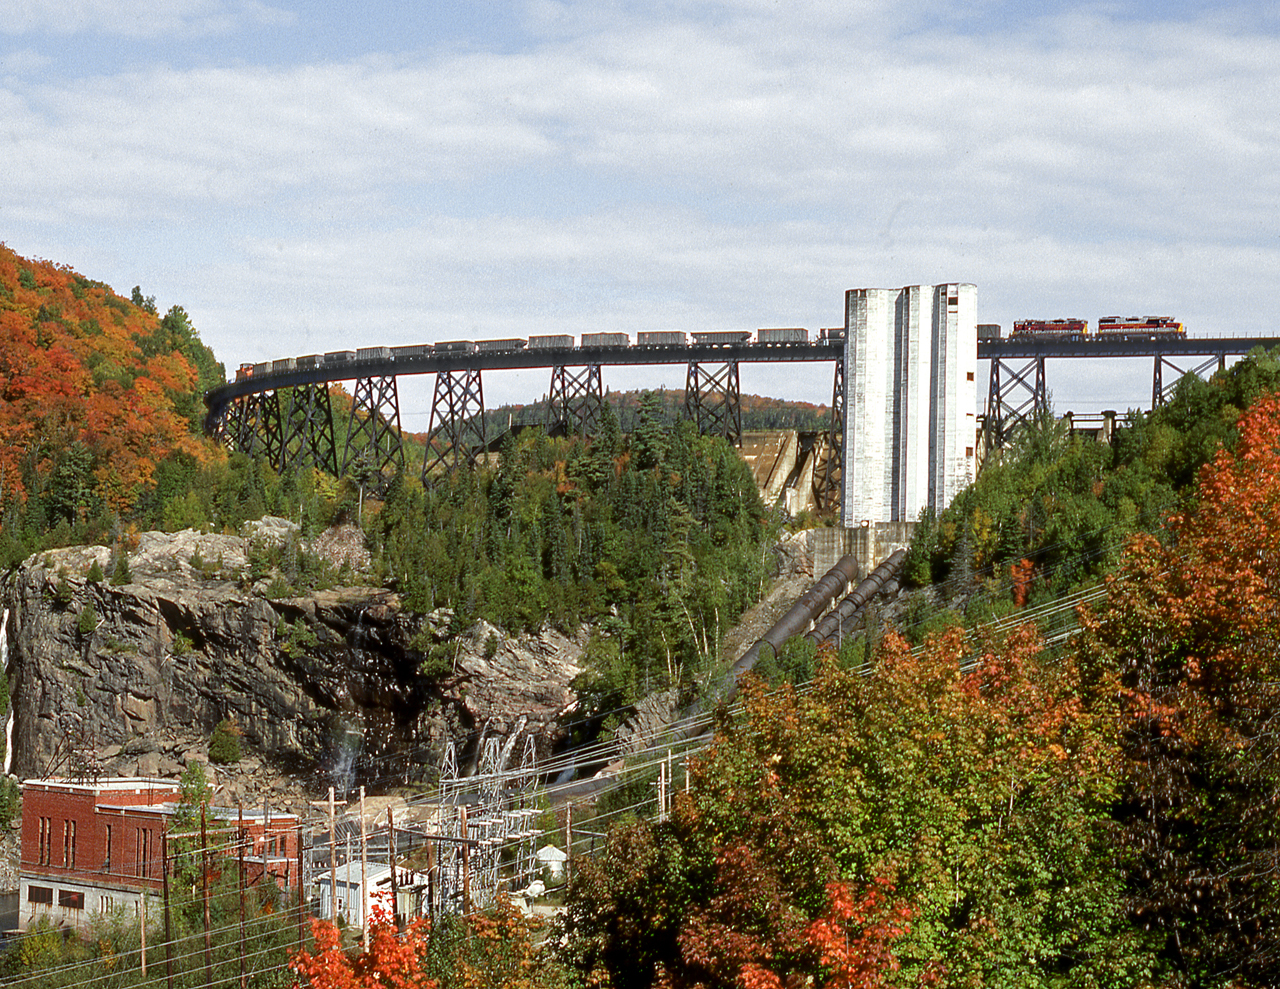 A southbound sinter train crosses the bridge over the hydro-electric dam on the Montreal River. A previous derailment backed tonnage up allowing for a rare daylight run of an ore train.